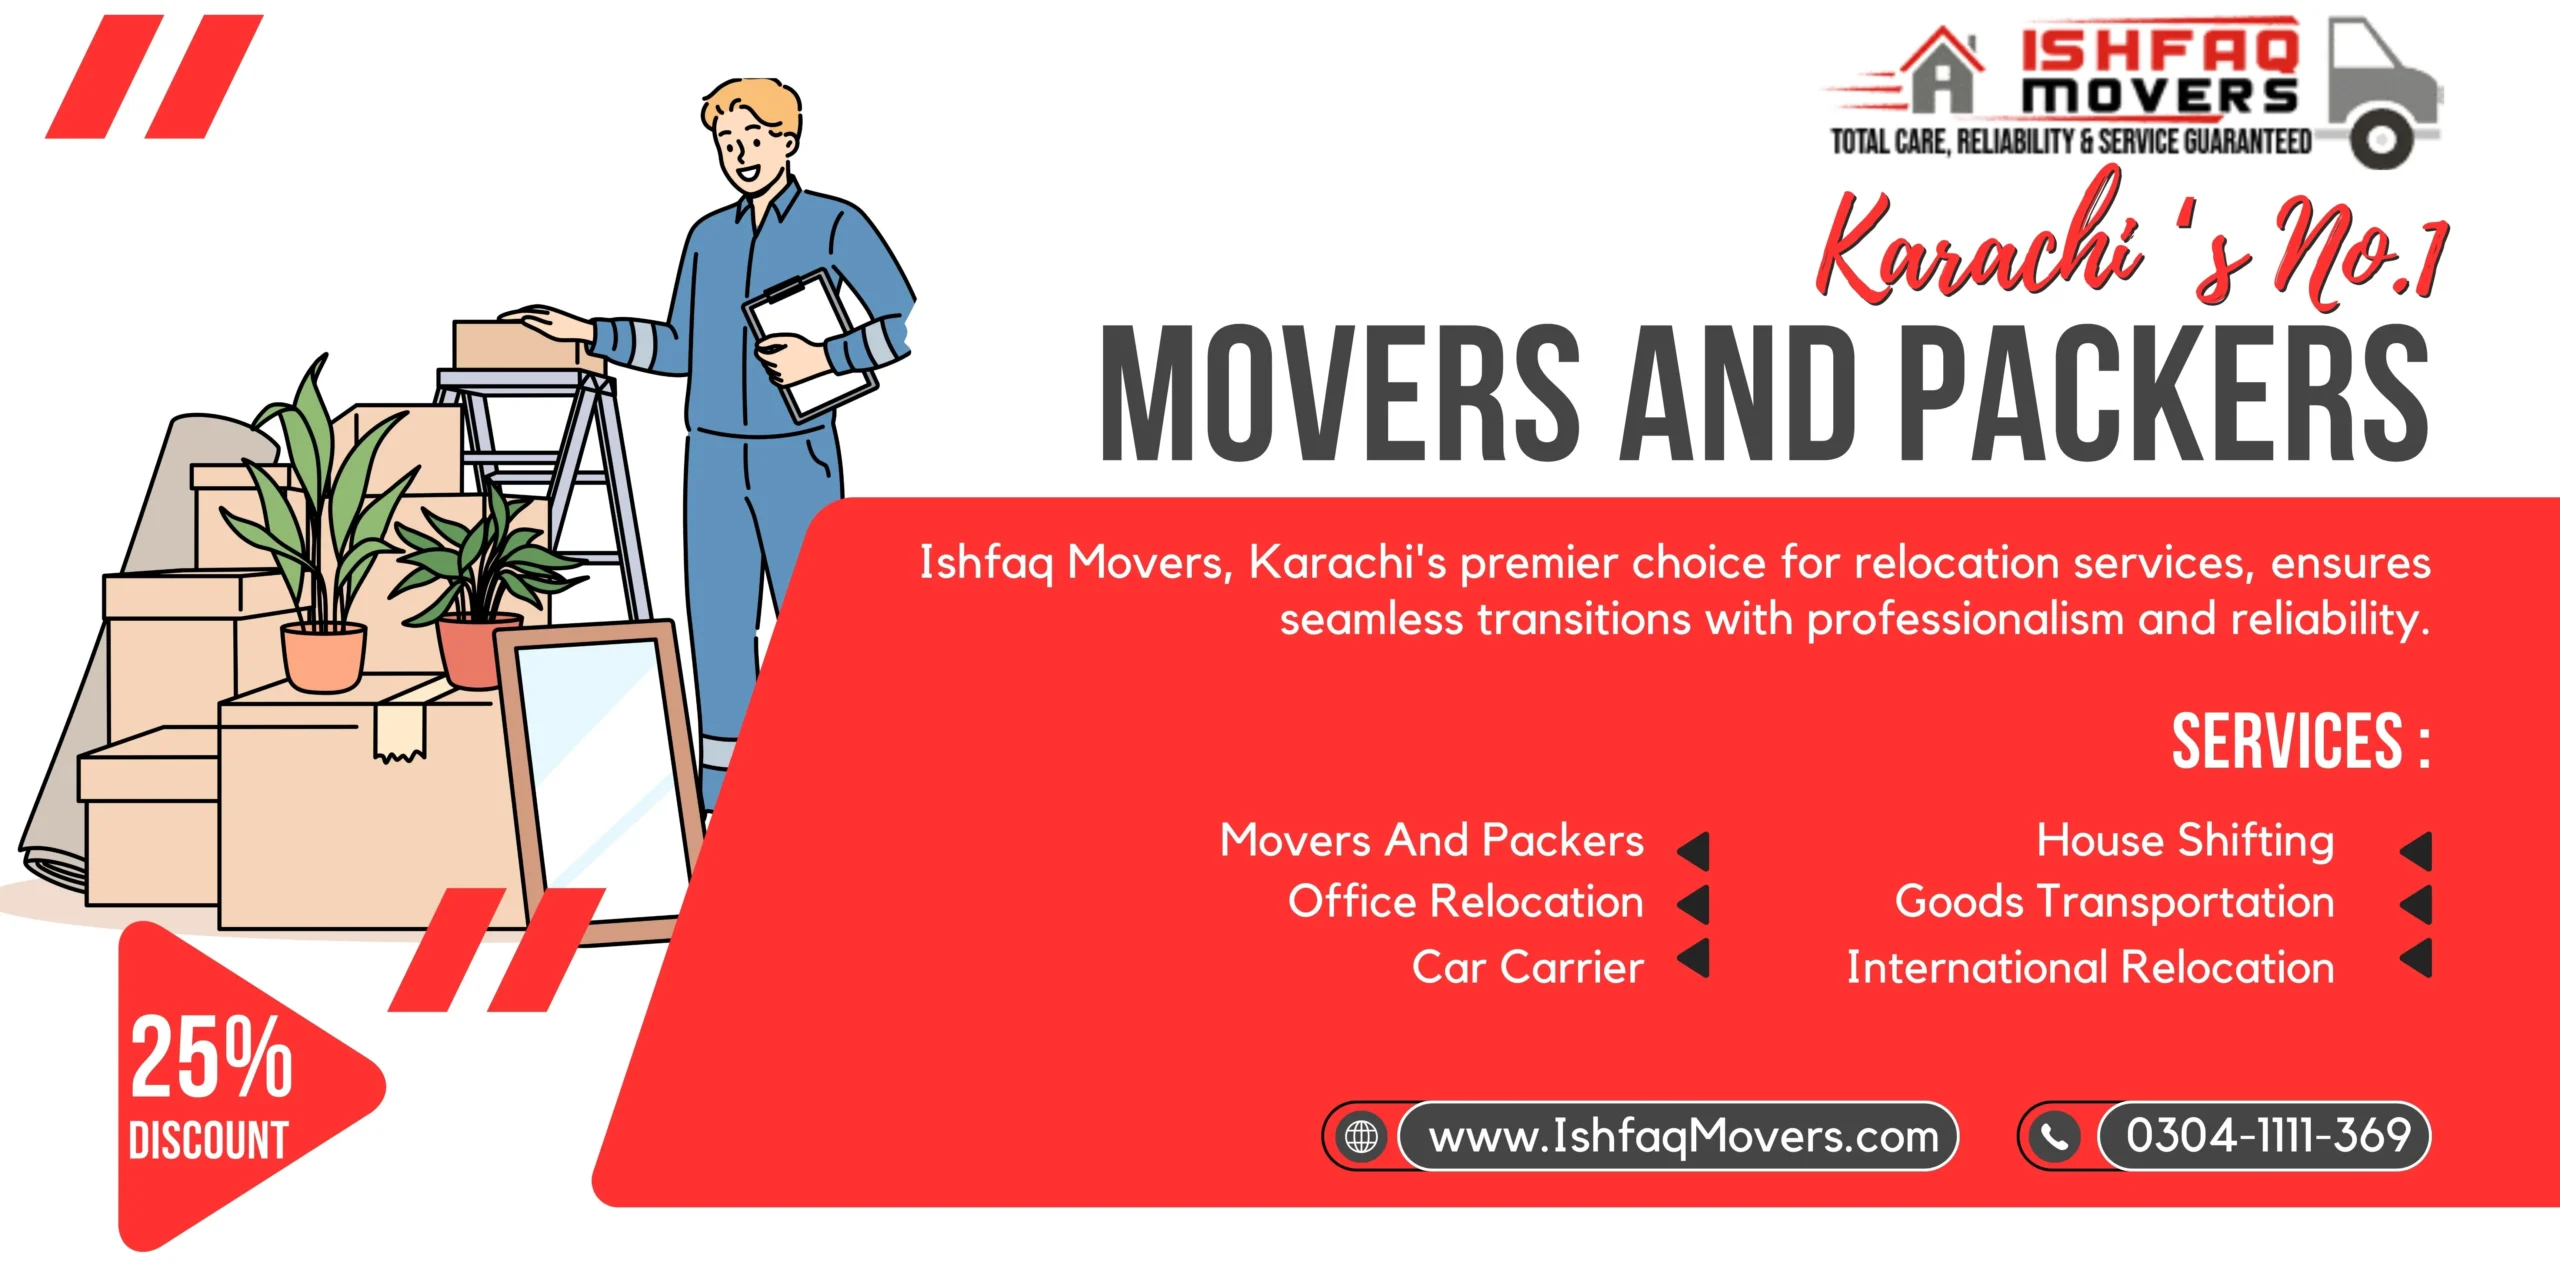 No.1 Movers And Packers In Karachi